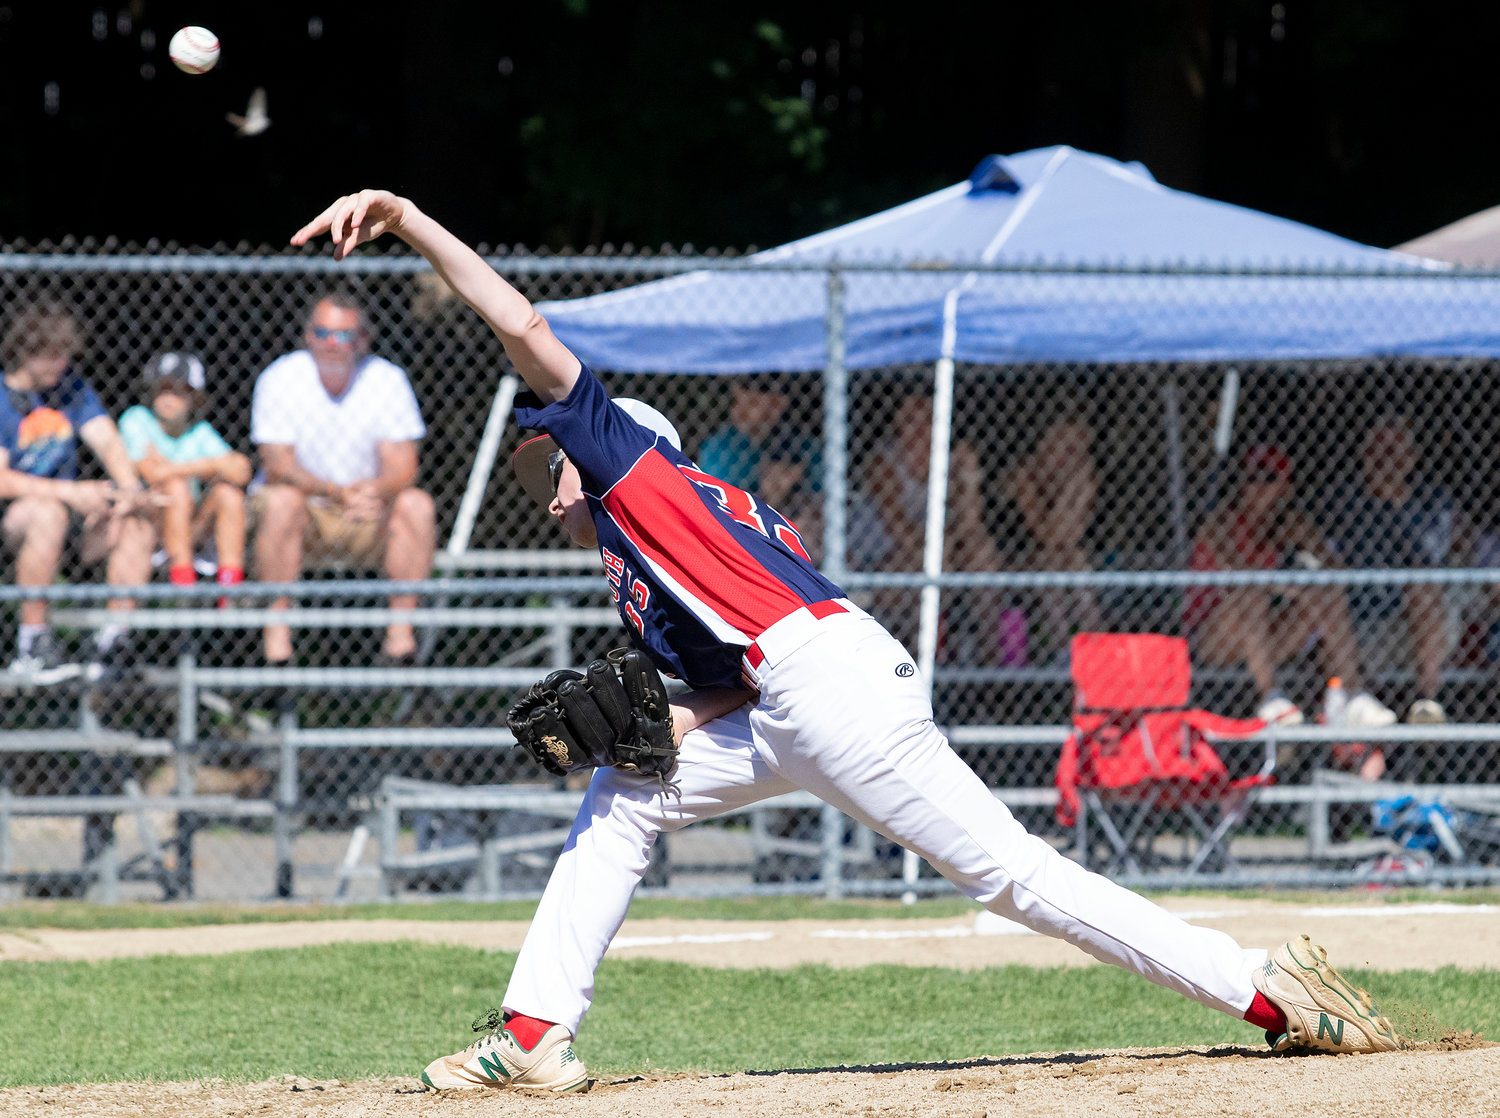 Portsmouth’s starting pitcher Tyler Boiani struck out six, walked none and allowed five hits and two runs.